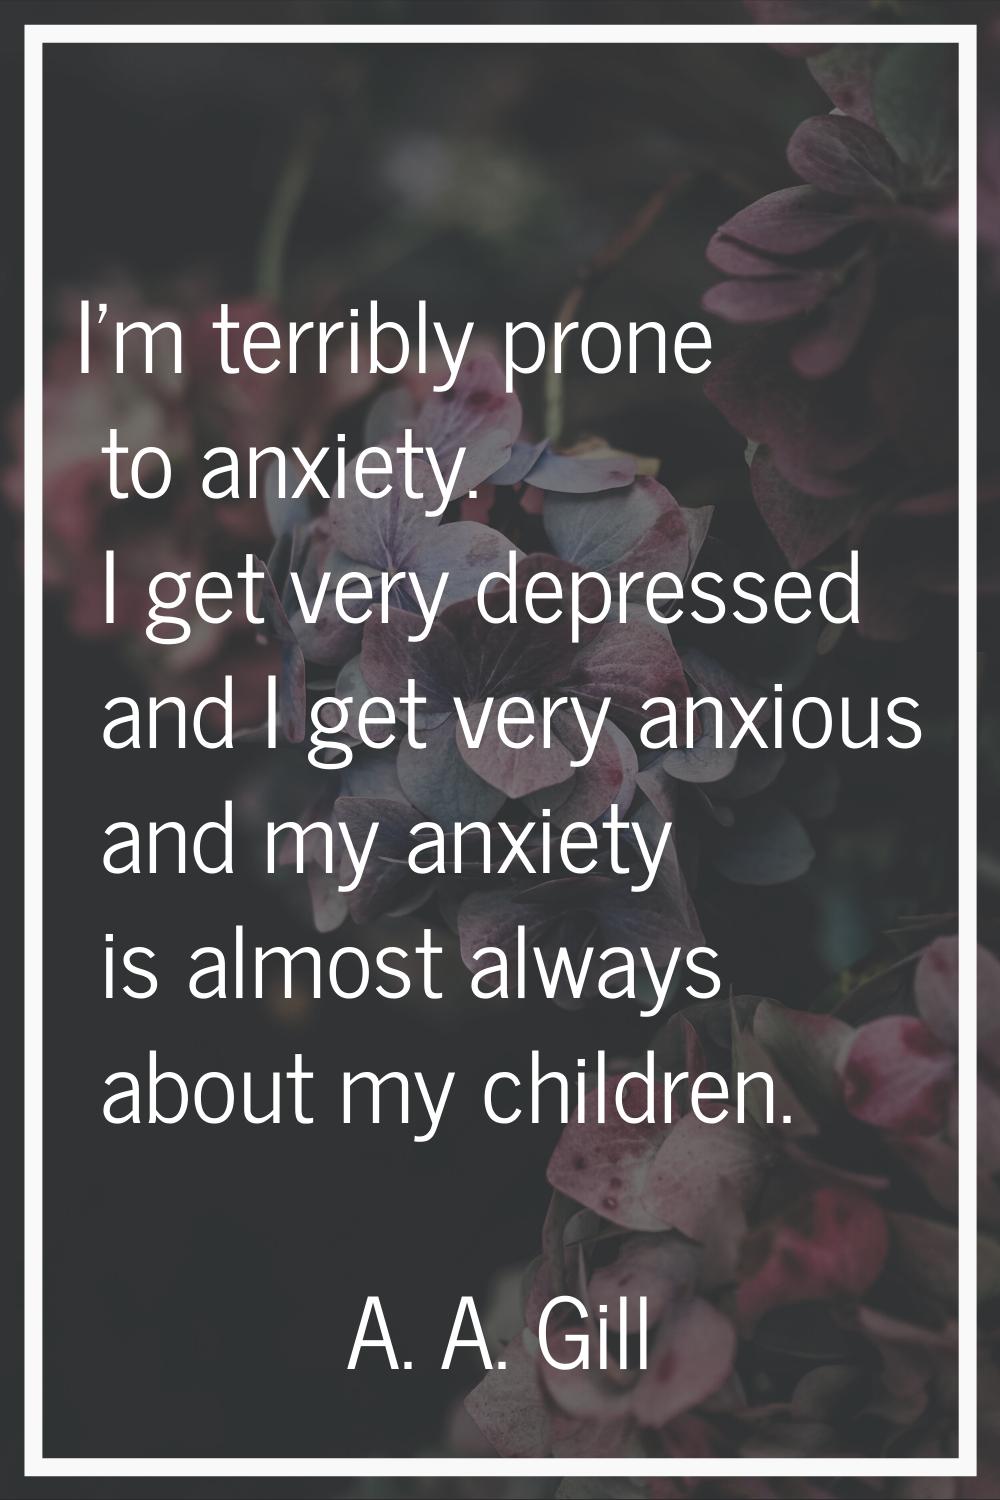 I'm terribly prone to anxiety. I get very depressed and I get very anxious and my anxiety is almost